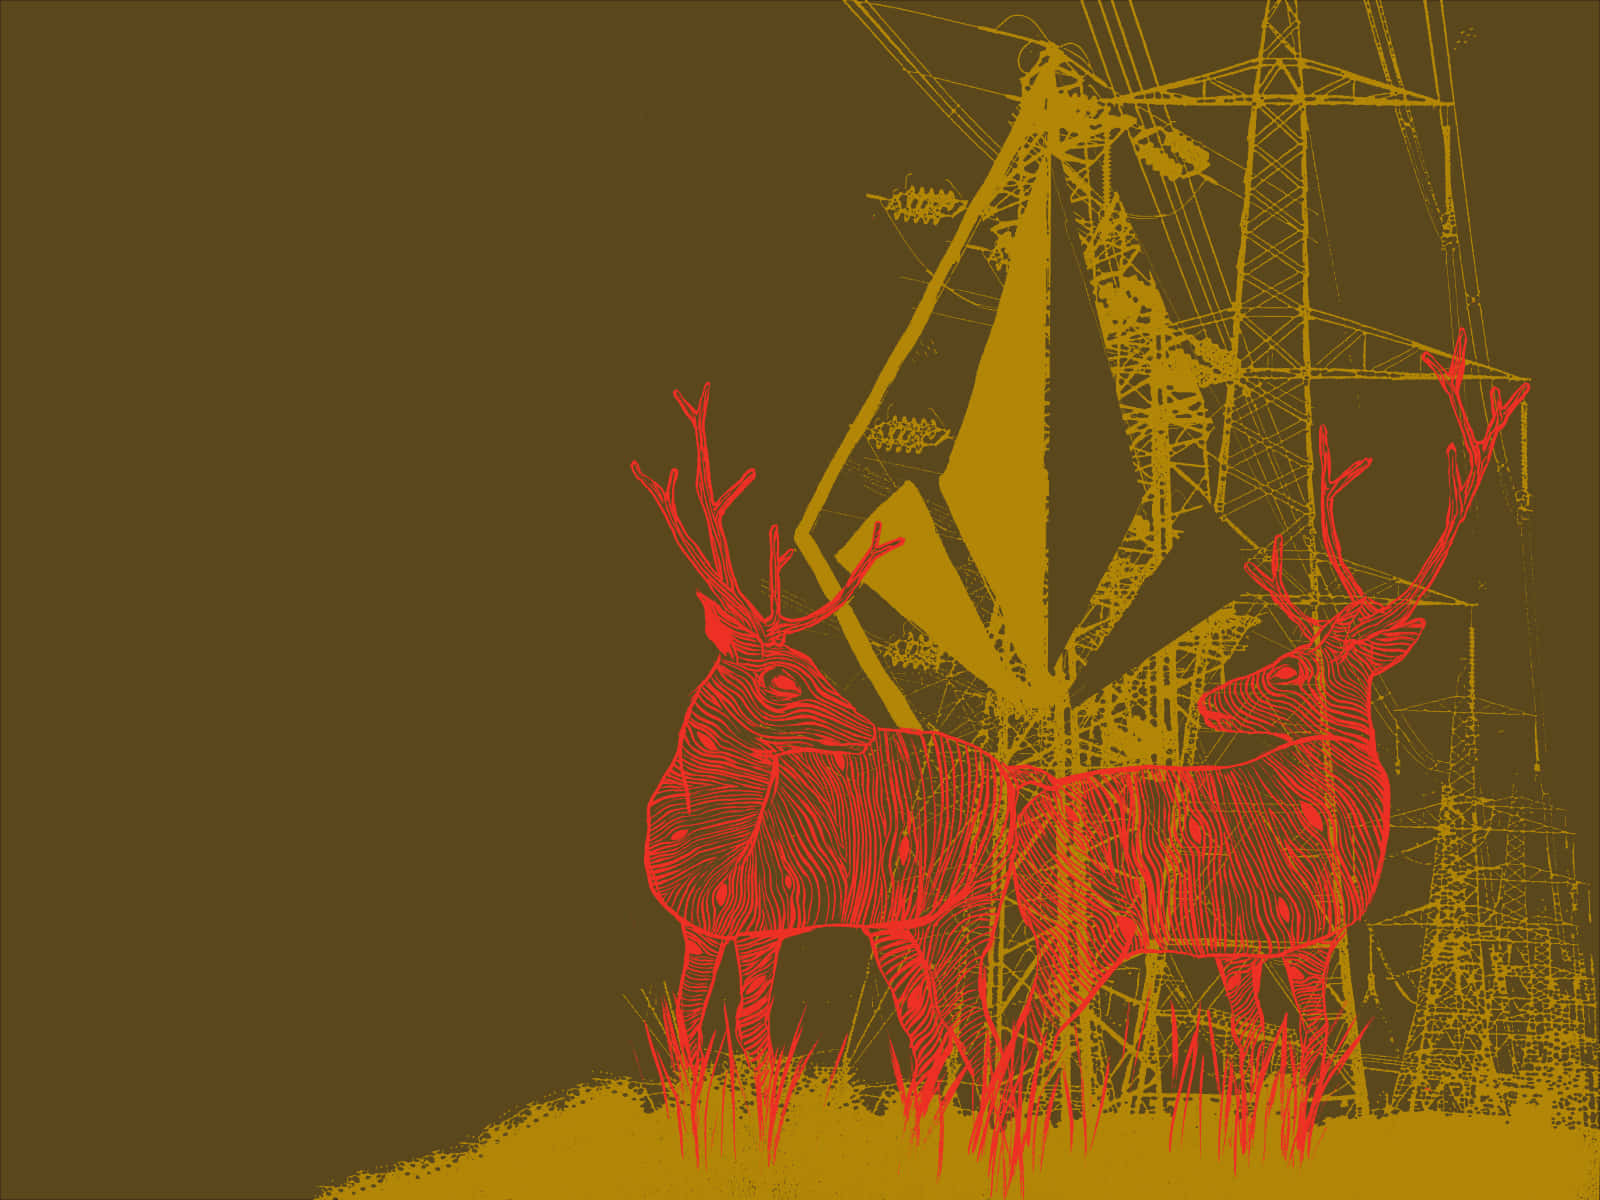 Red Deer Illustration Electric Towers Background Wallpaper